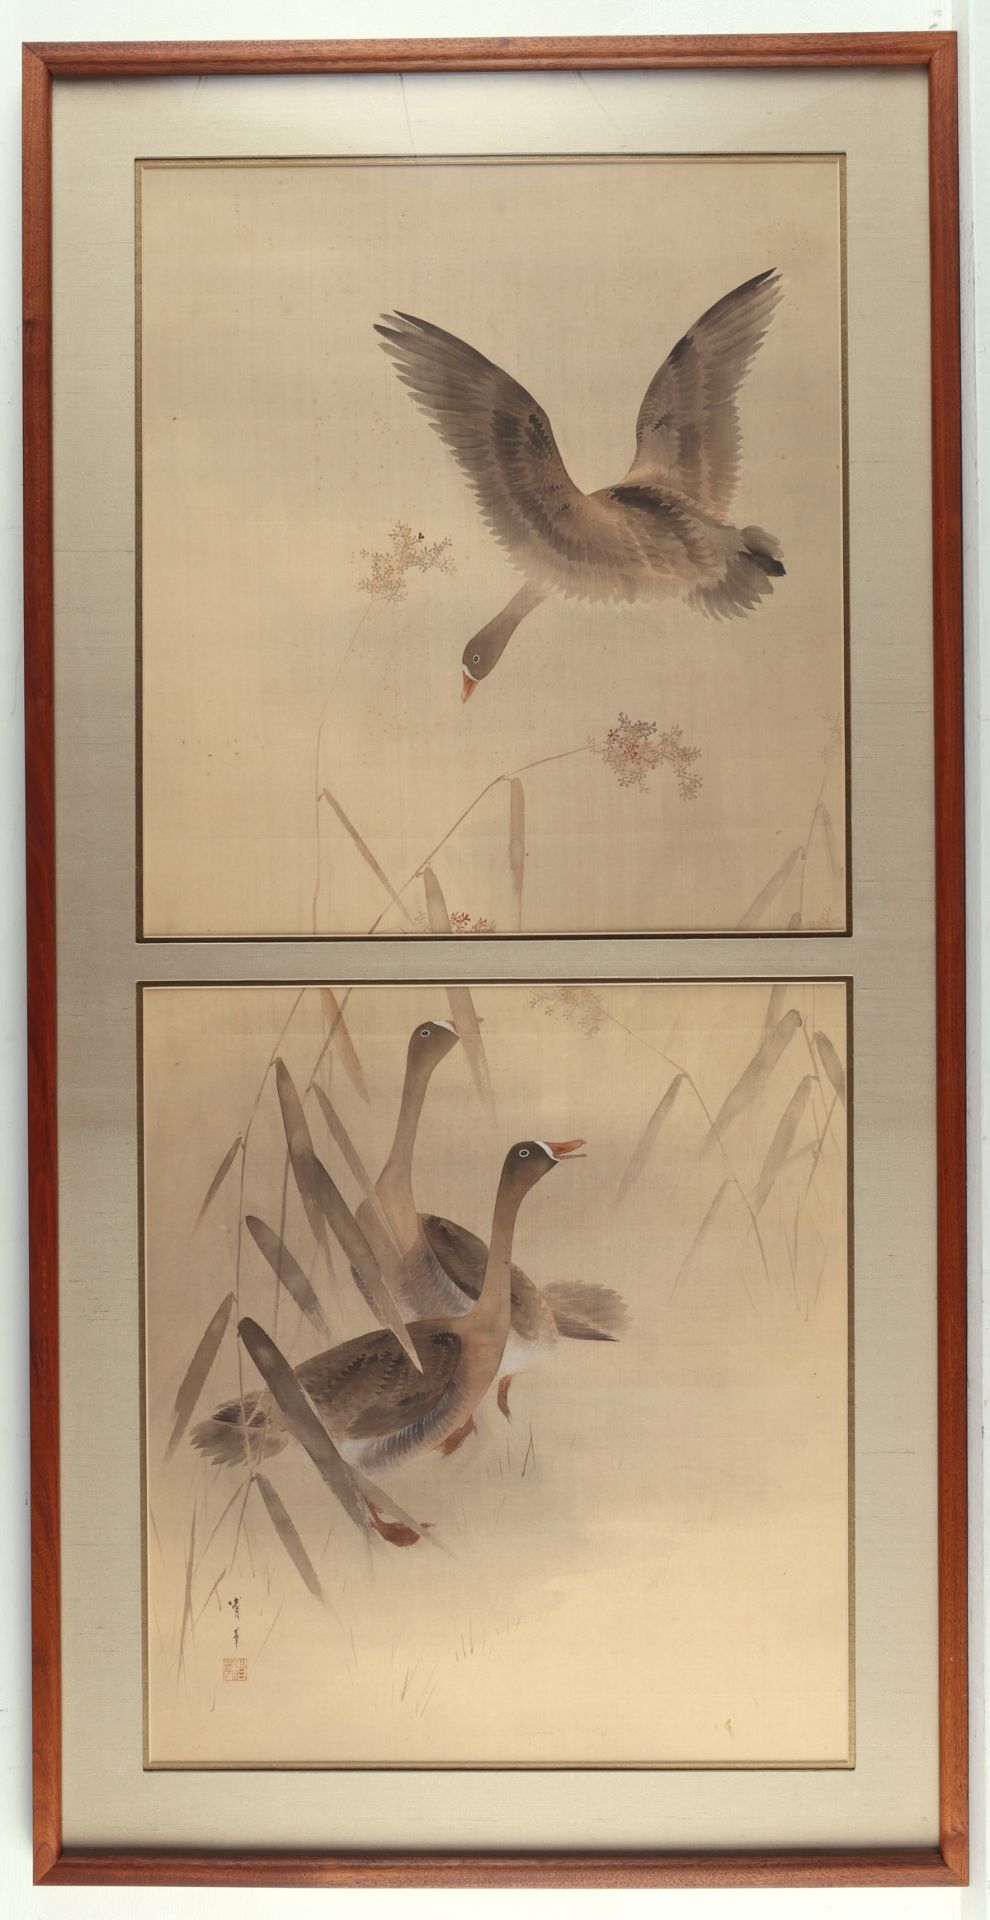 19th/20th c. Japanese Scroll Painting of Ducks - Image 2 of 5